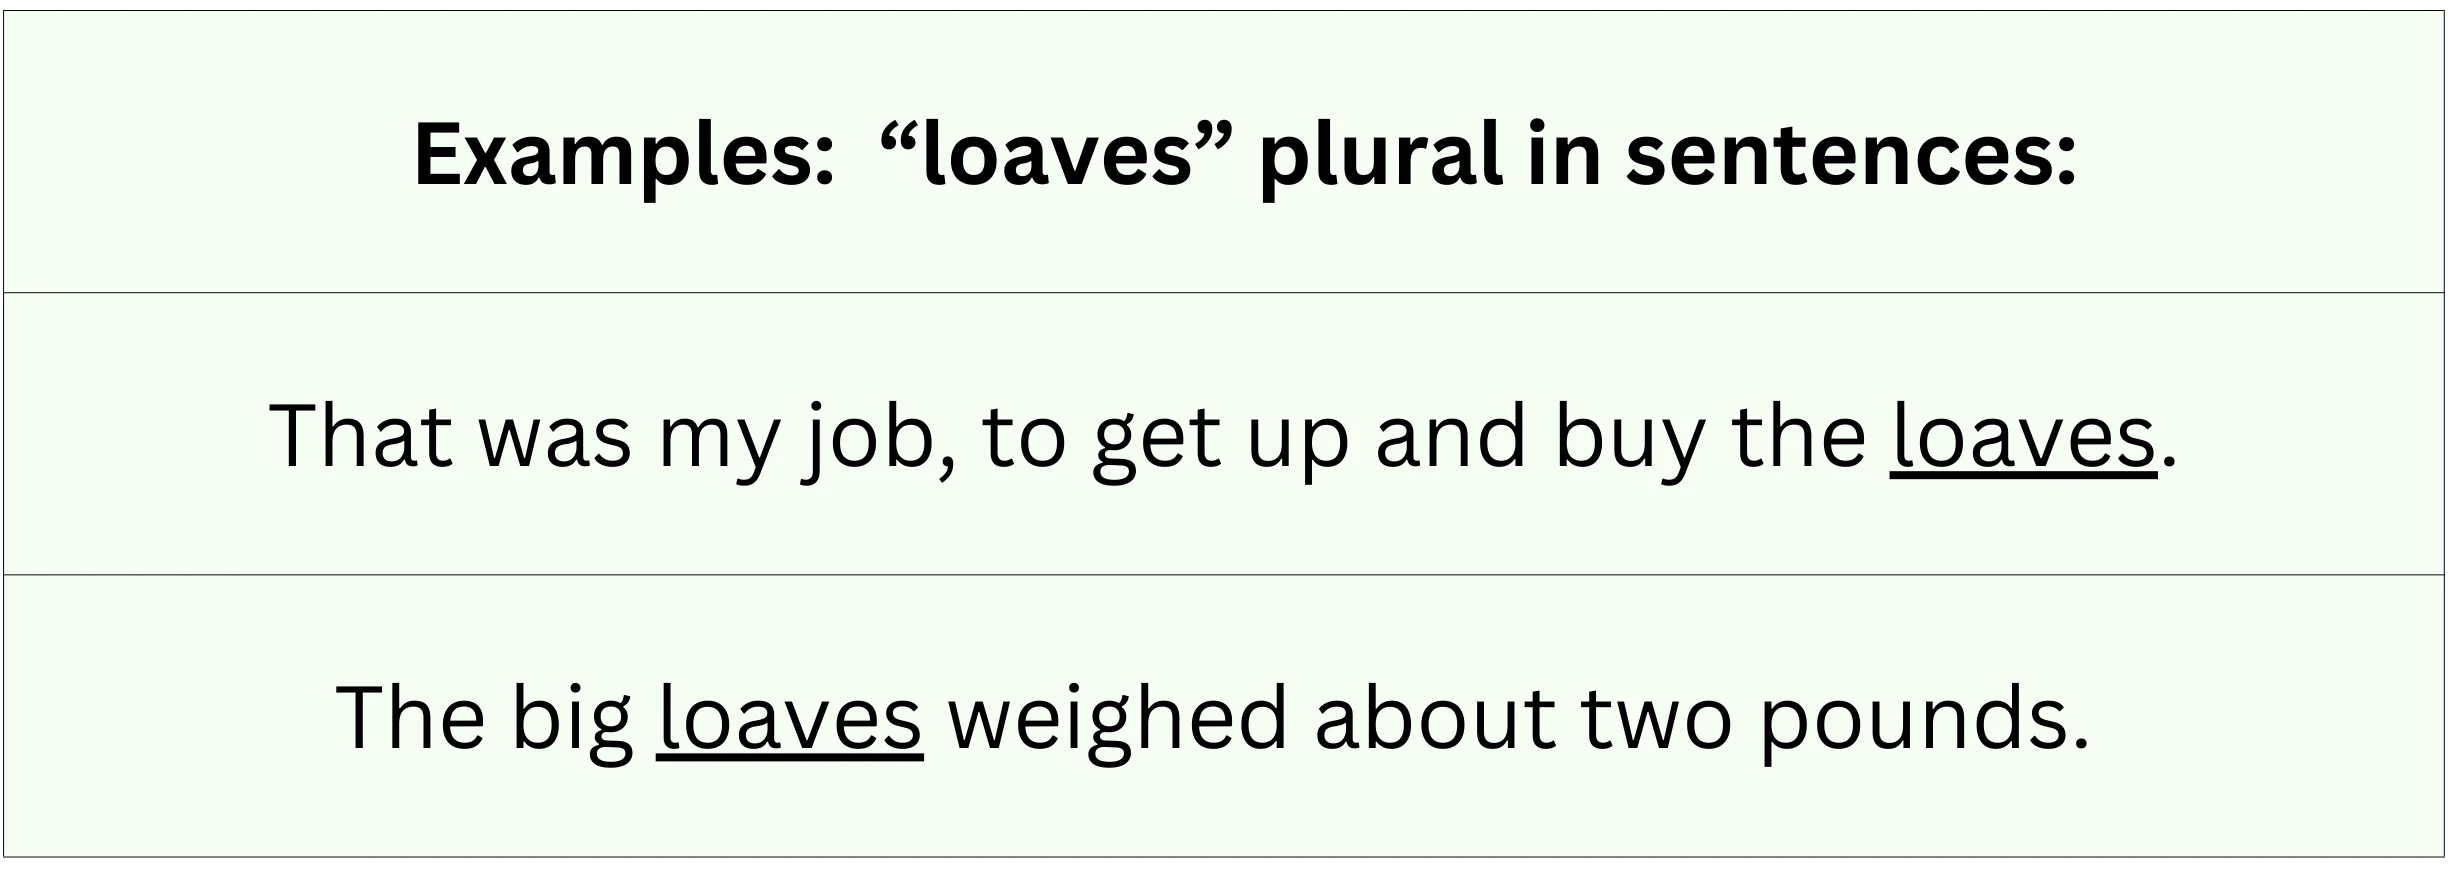 "Loaves" plural shown in sentences.